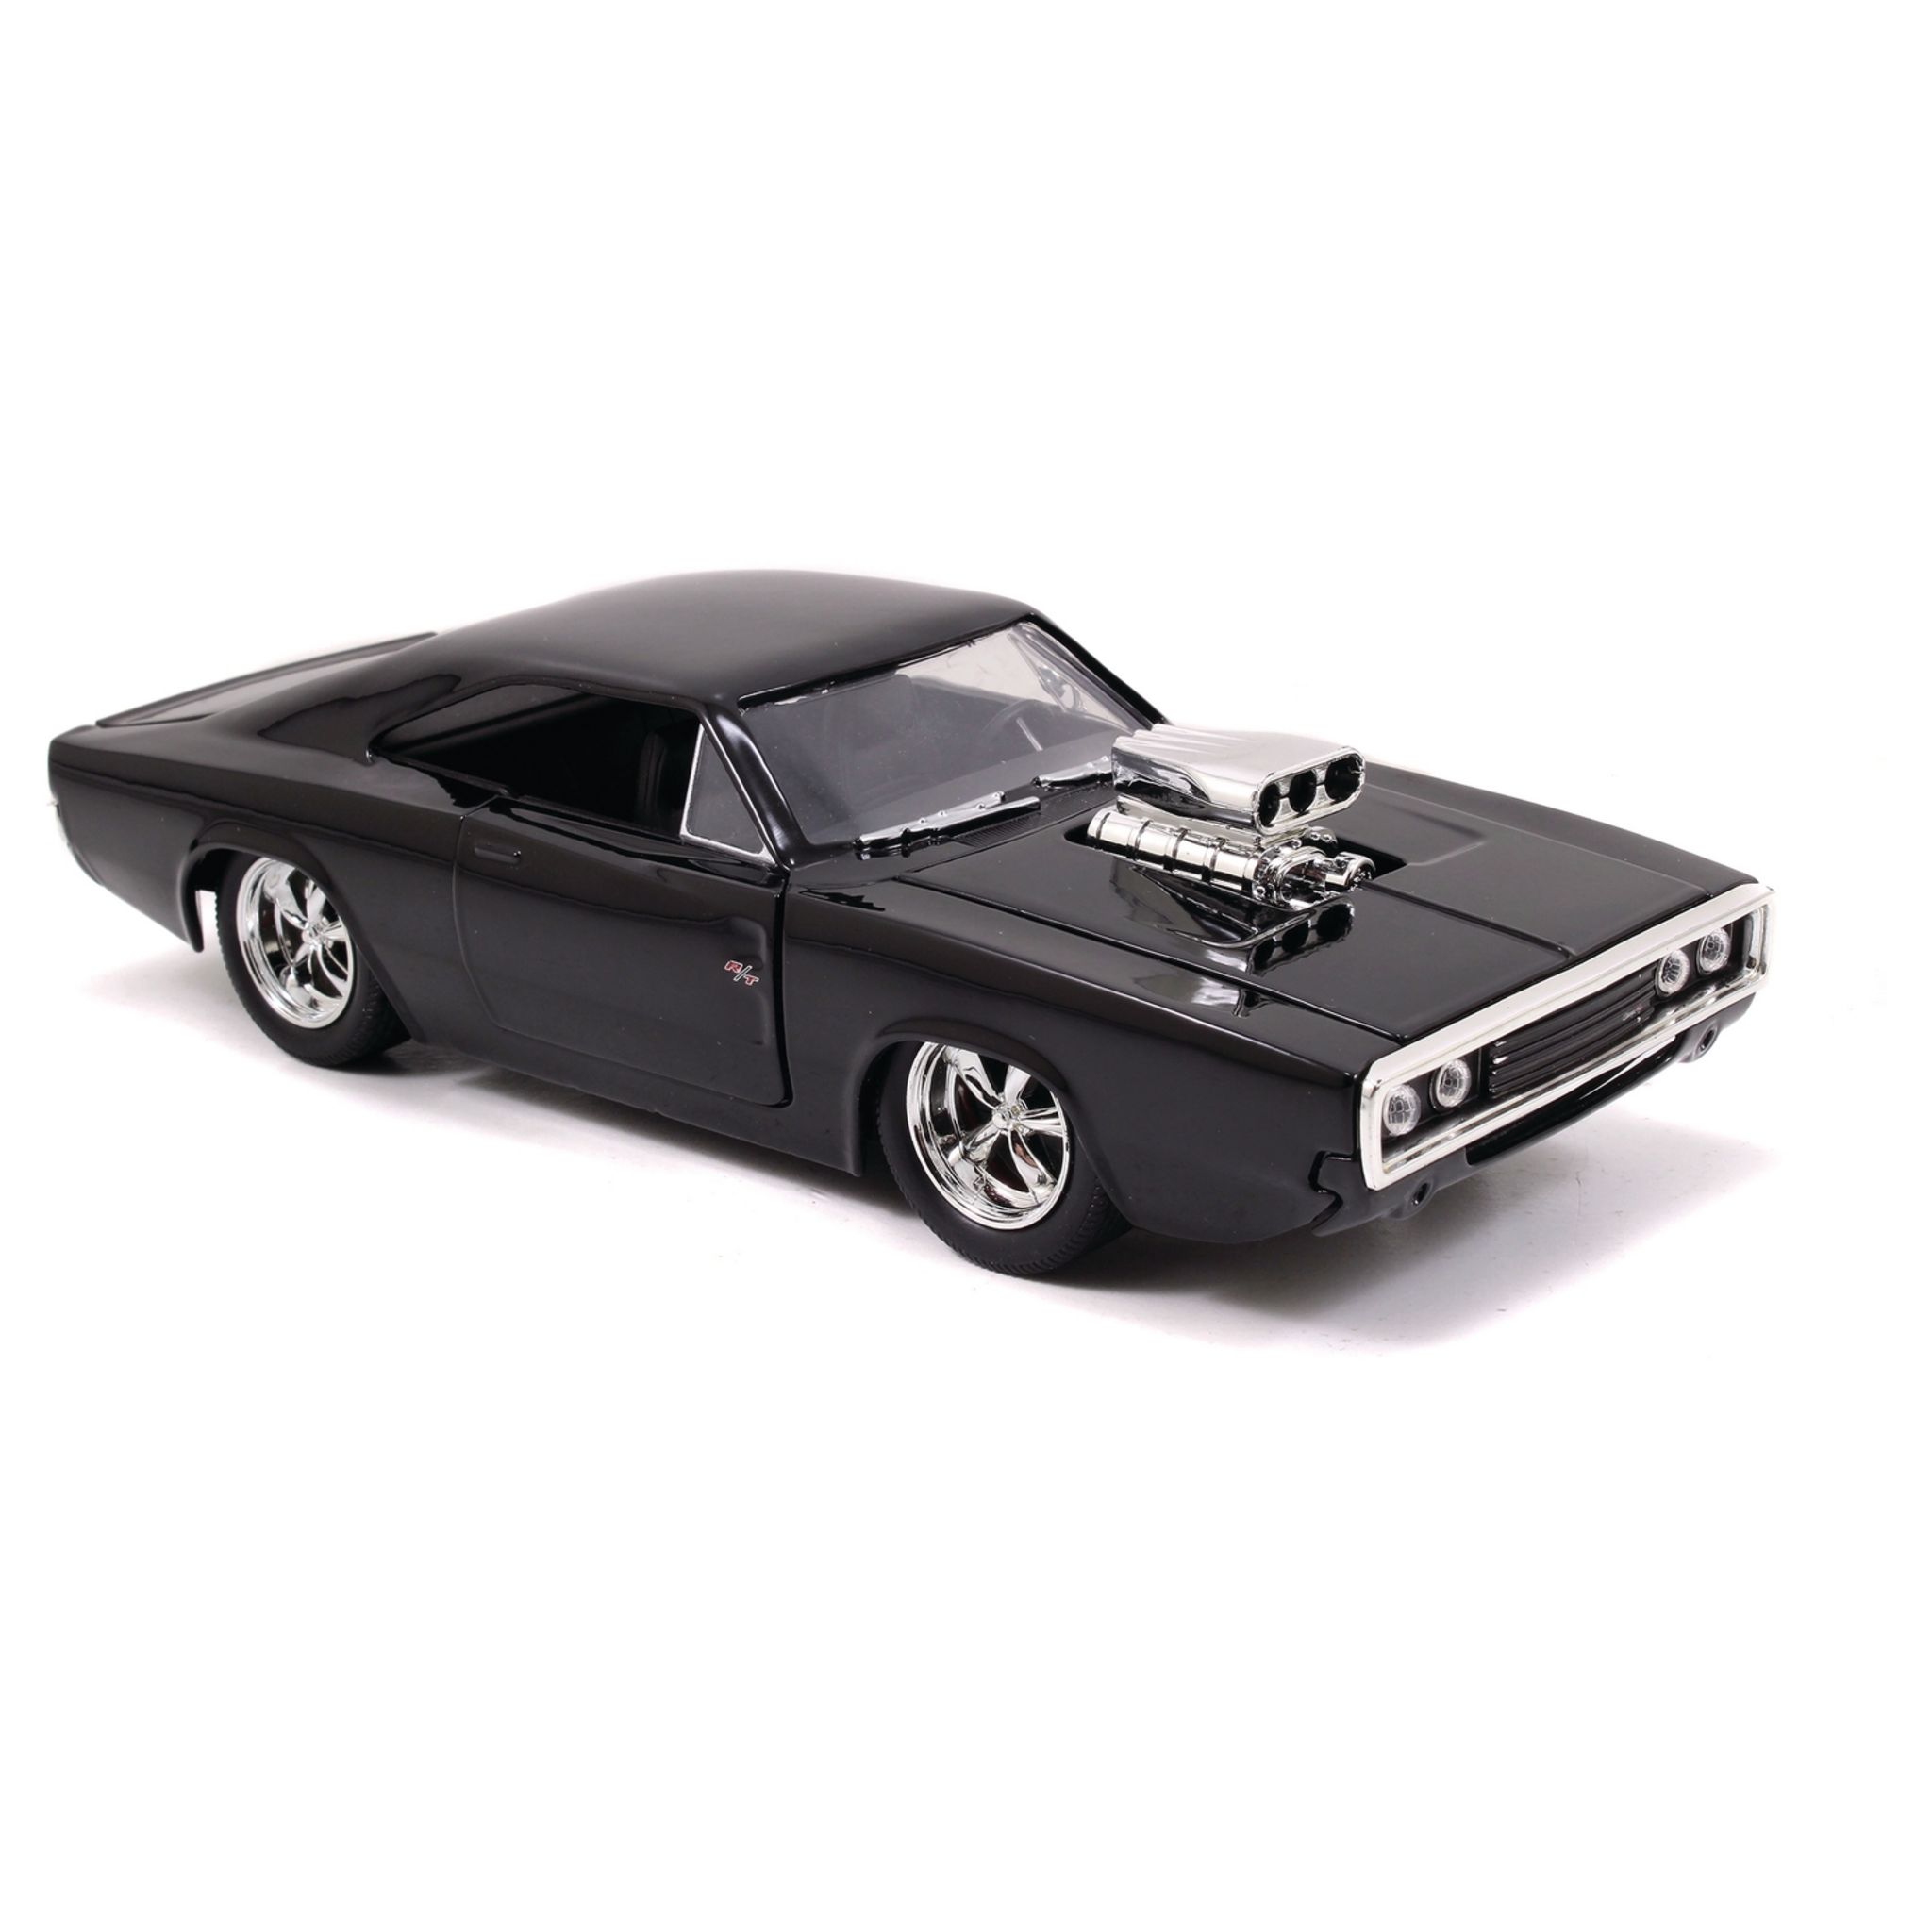 FAST & FURIOUS - VOITURE RADIOCOMMANDE DODGE CHARGER 1/24EME